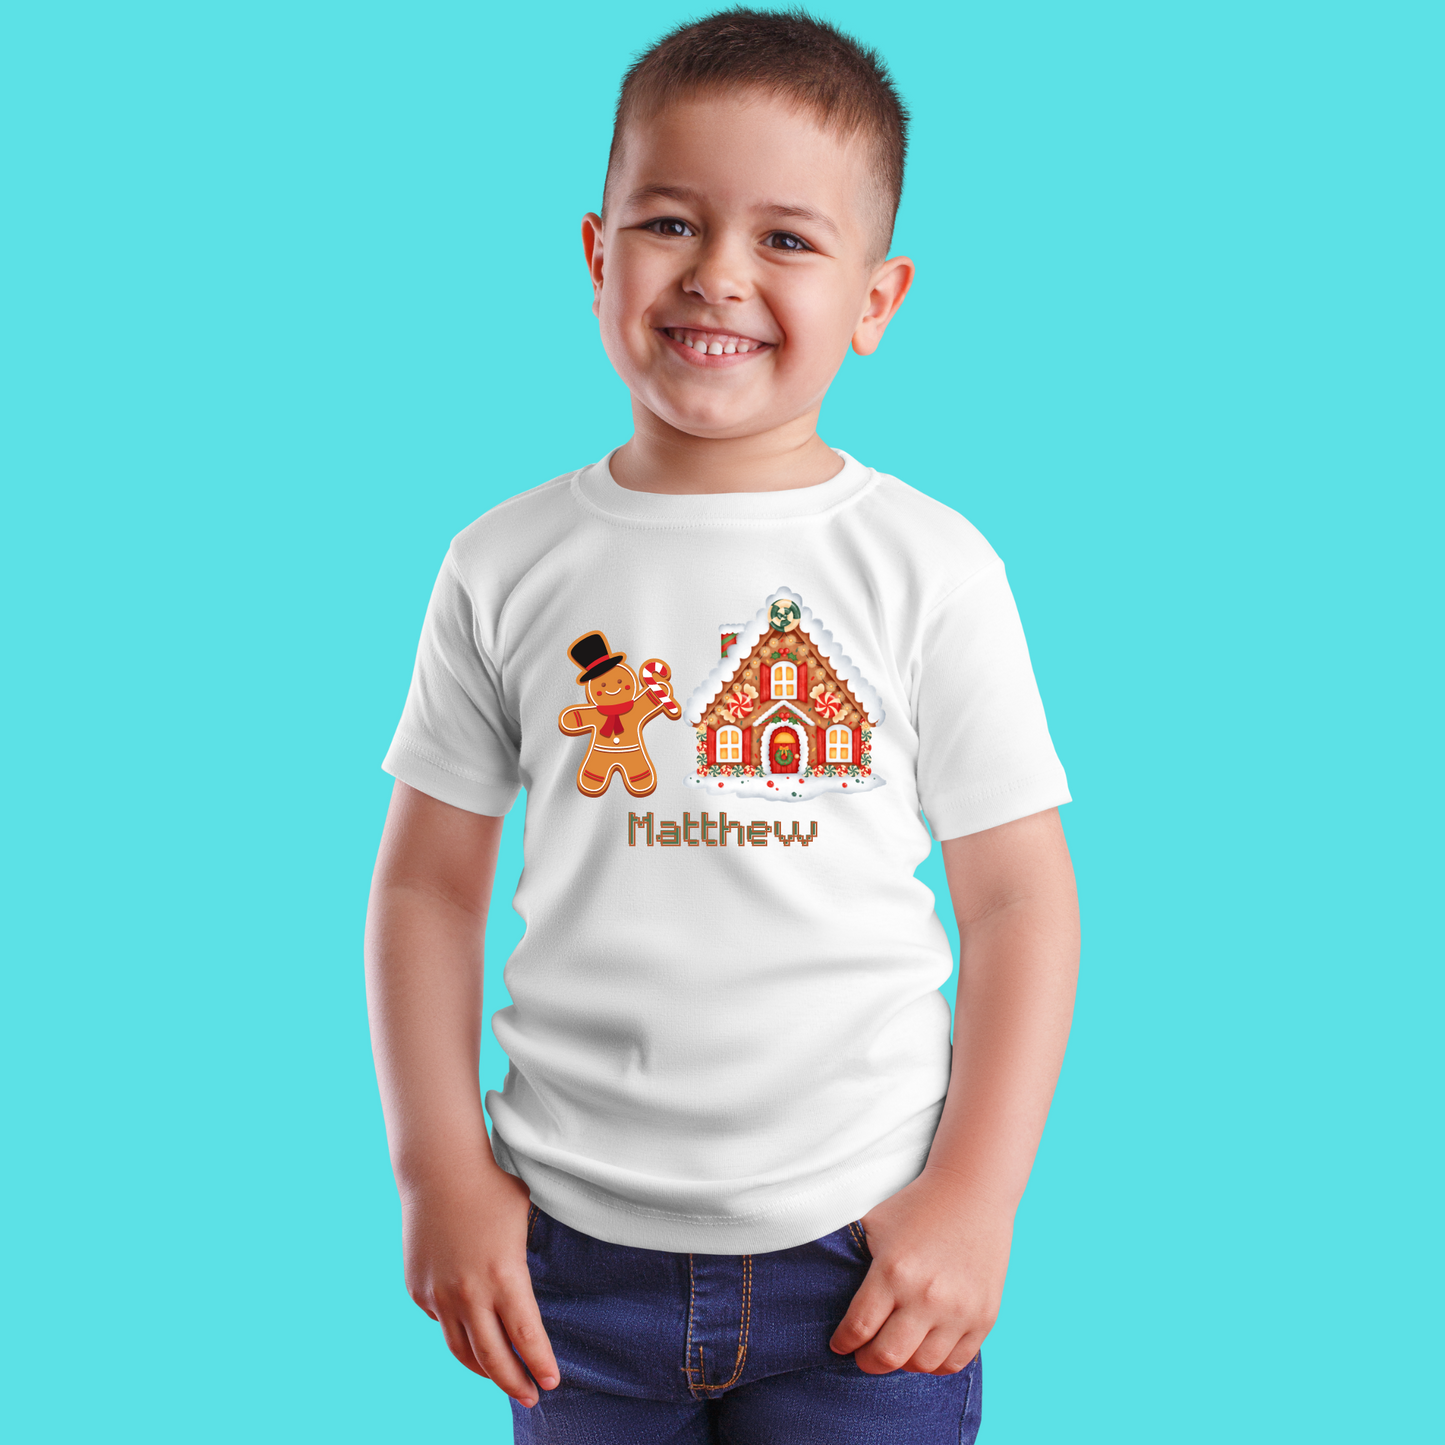 Gingerbread Graphic Shirt. Personalized Graphic Shirt for Kids